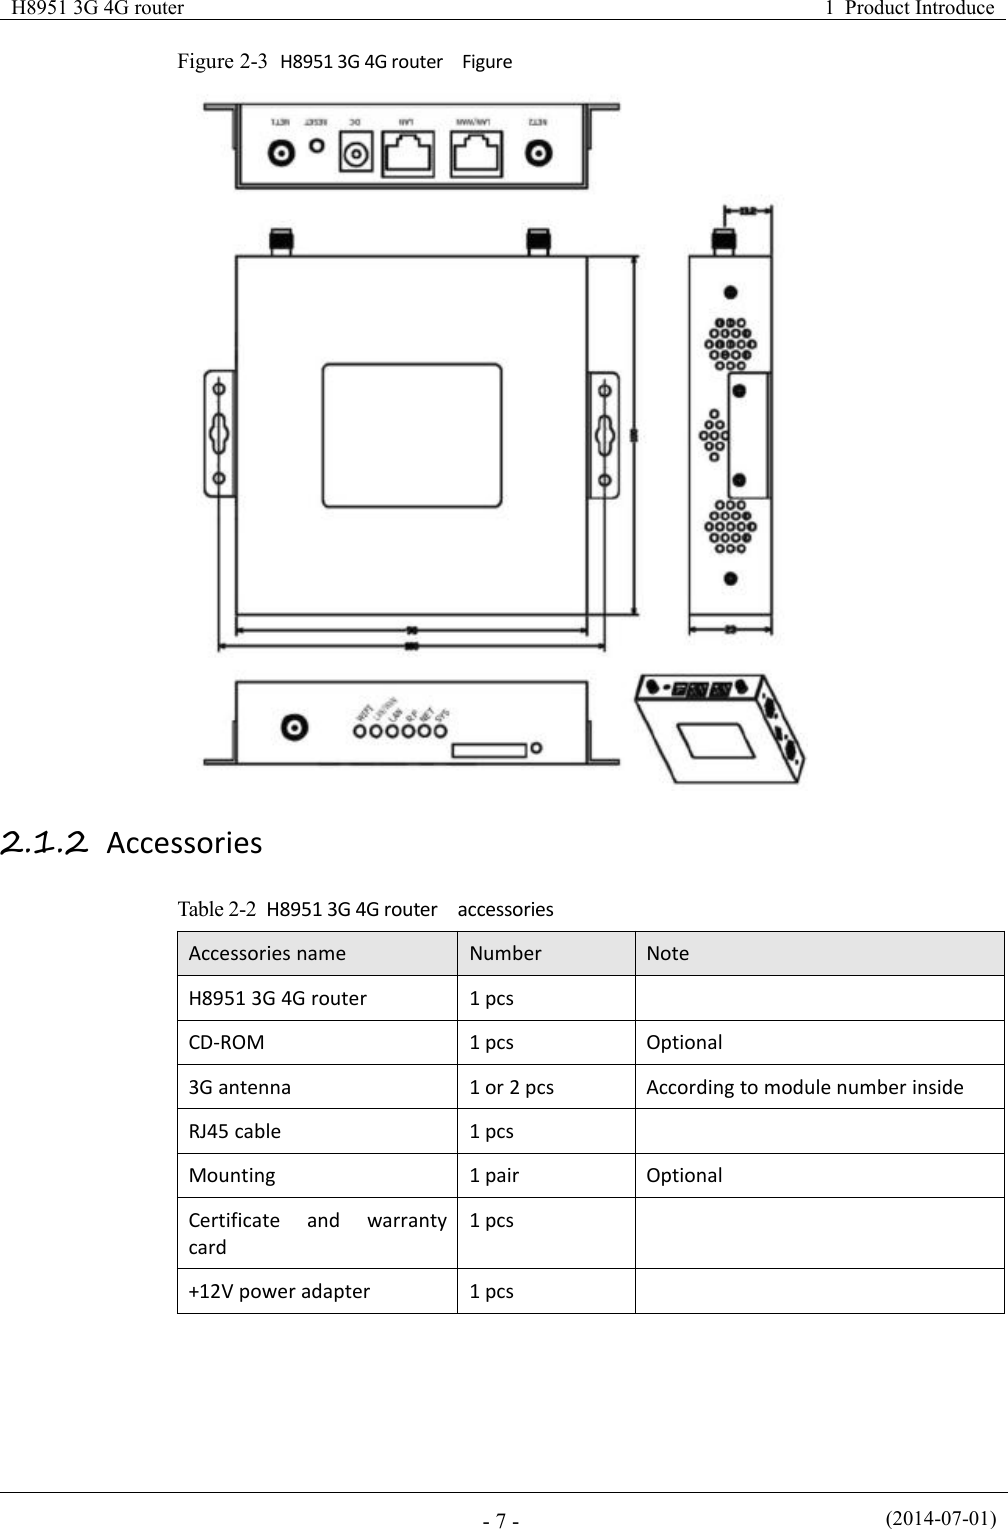 H8951 3G 4G router1 Product Introduce(2014-07-01)- 7 -Figure 2-3 H8951 3G 4G router Figure2.1.2 AccessoriesTable 2-2 H8951 3G 4G router accessoriesAccessories nameNumberNoteH8951 3G 4G router1 pcsCD-ROM1 pcsOptional3G antenna1 or 2 pcsAccording to module number insideRJ45 cable1 pcsMounting1 pairOptionalCertificate and warrantycard1 pcs+12V power adapter1 pcs